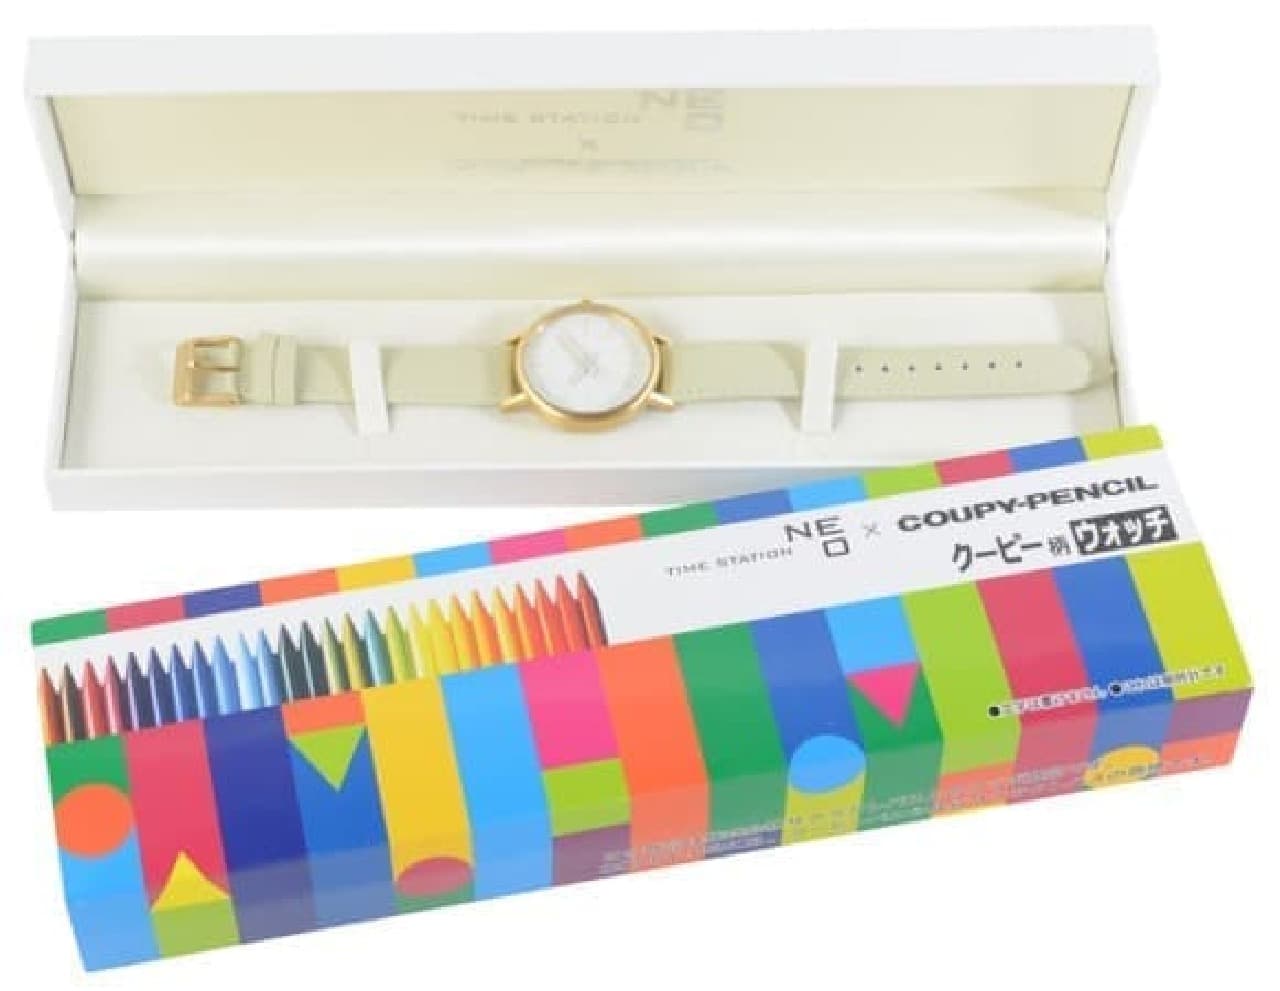 Sakura Color Products x Time Station NEO "Coupy Pattern Watch"